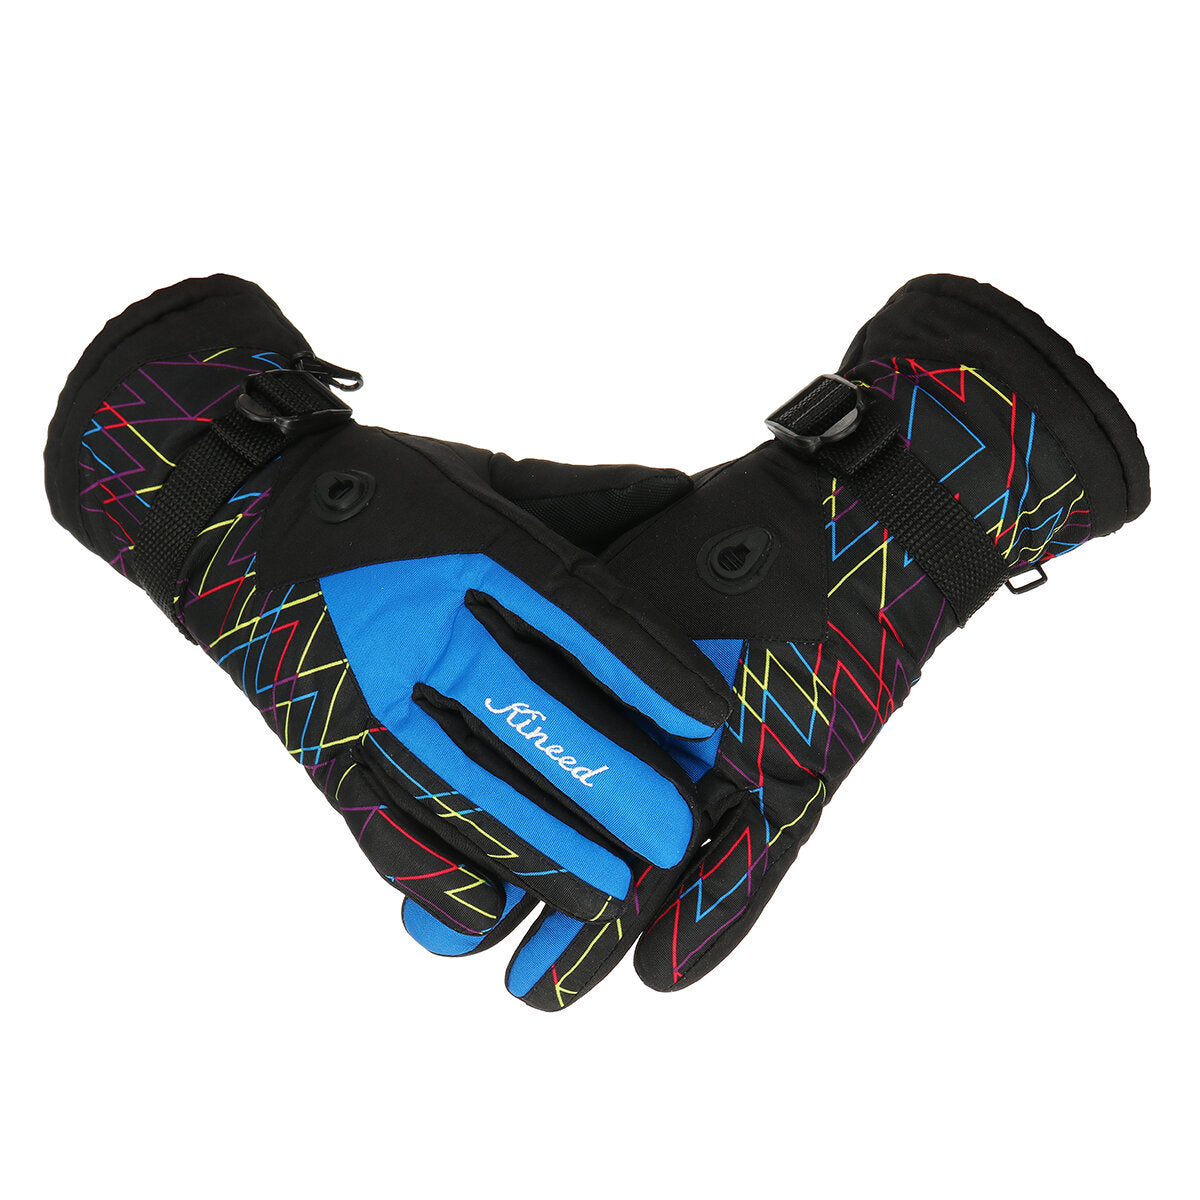 Winter Warm Velvet Gloves Touch Screen Waterproof Windproof Riding Cycling Skiing Climbing Gloves